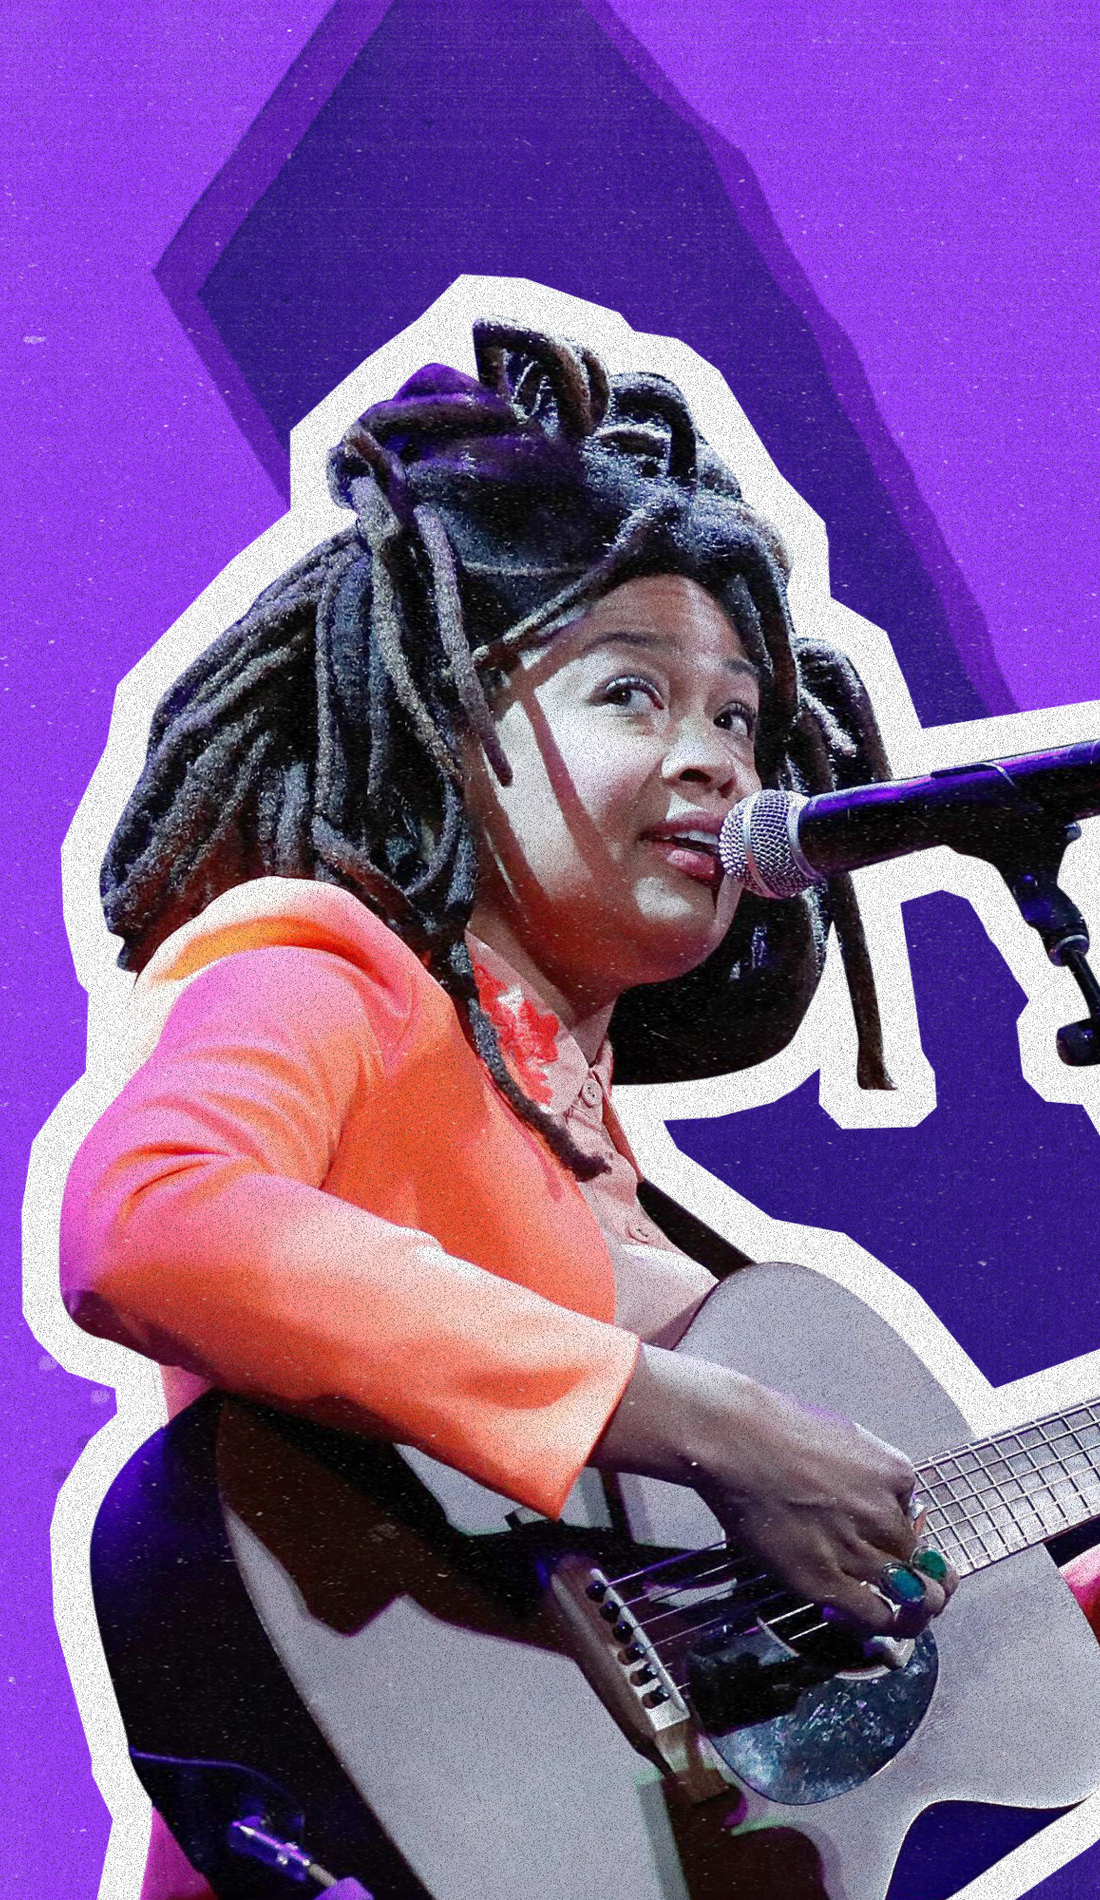 A Valerie June live event